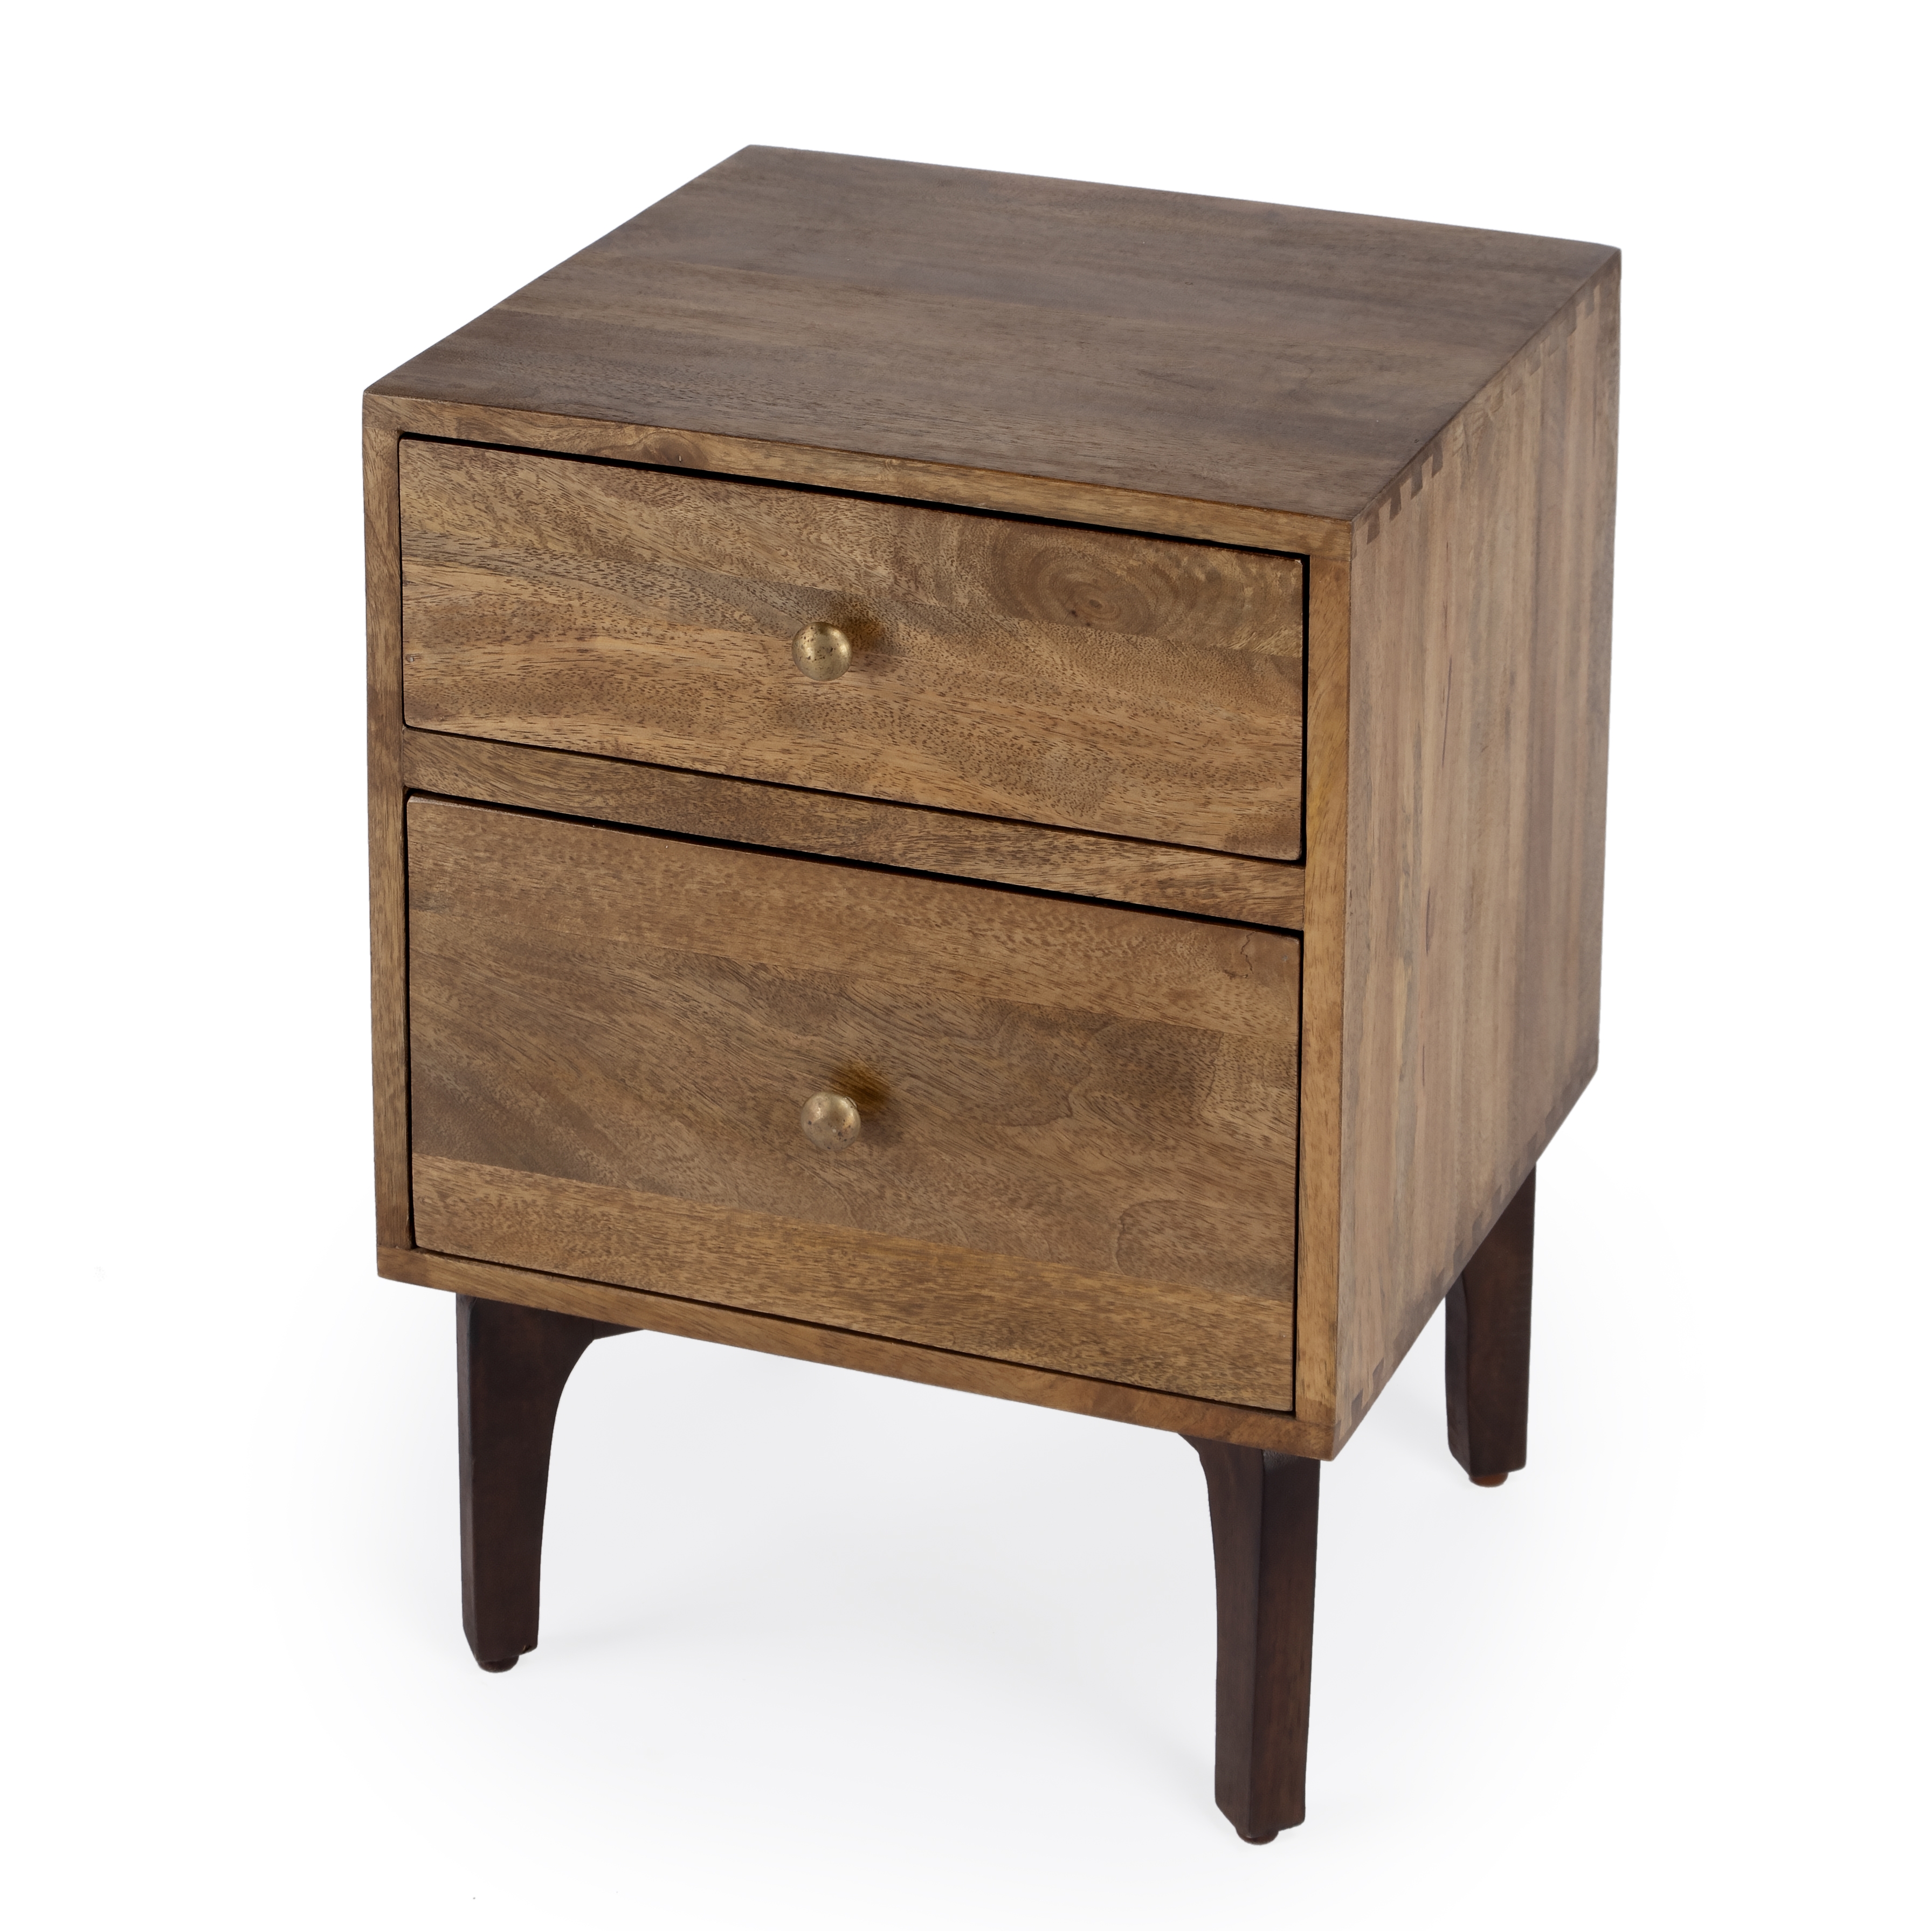 Nuance Brown End Table - Image 1